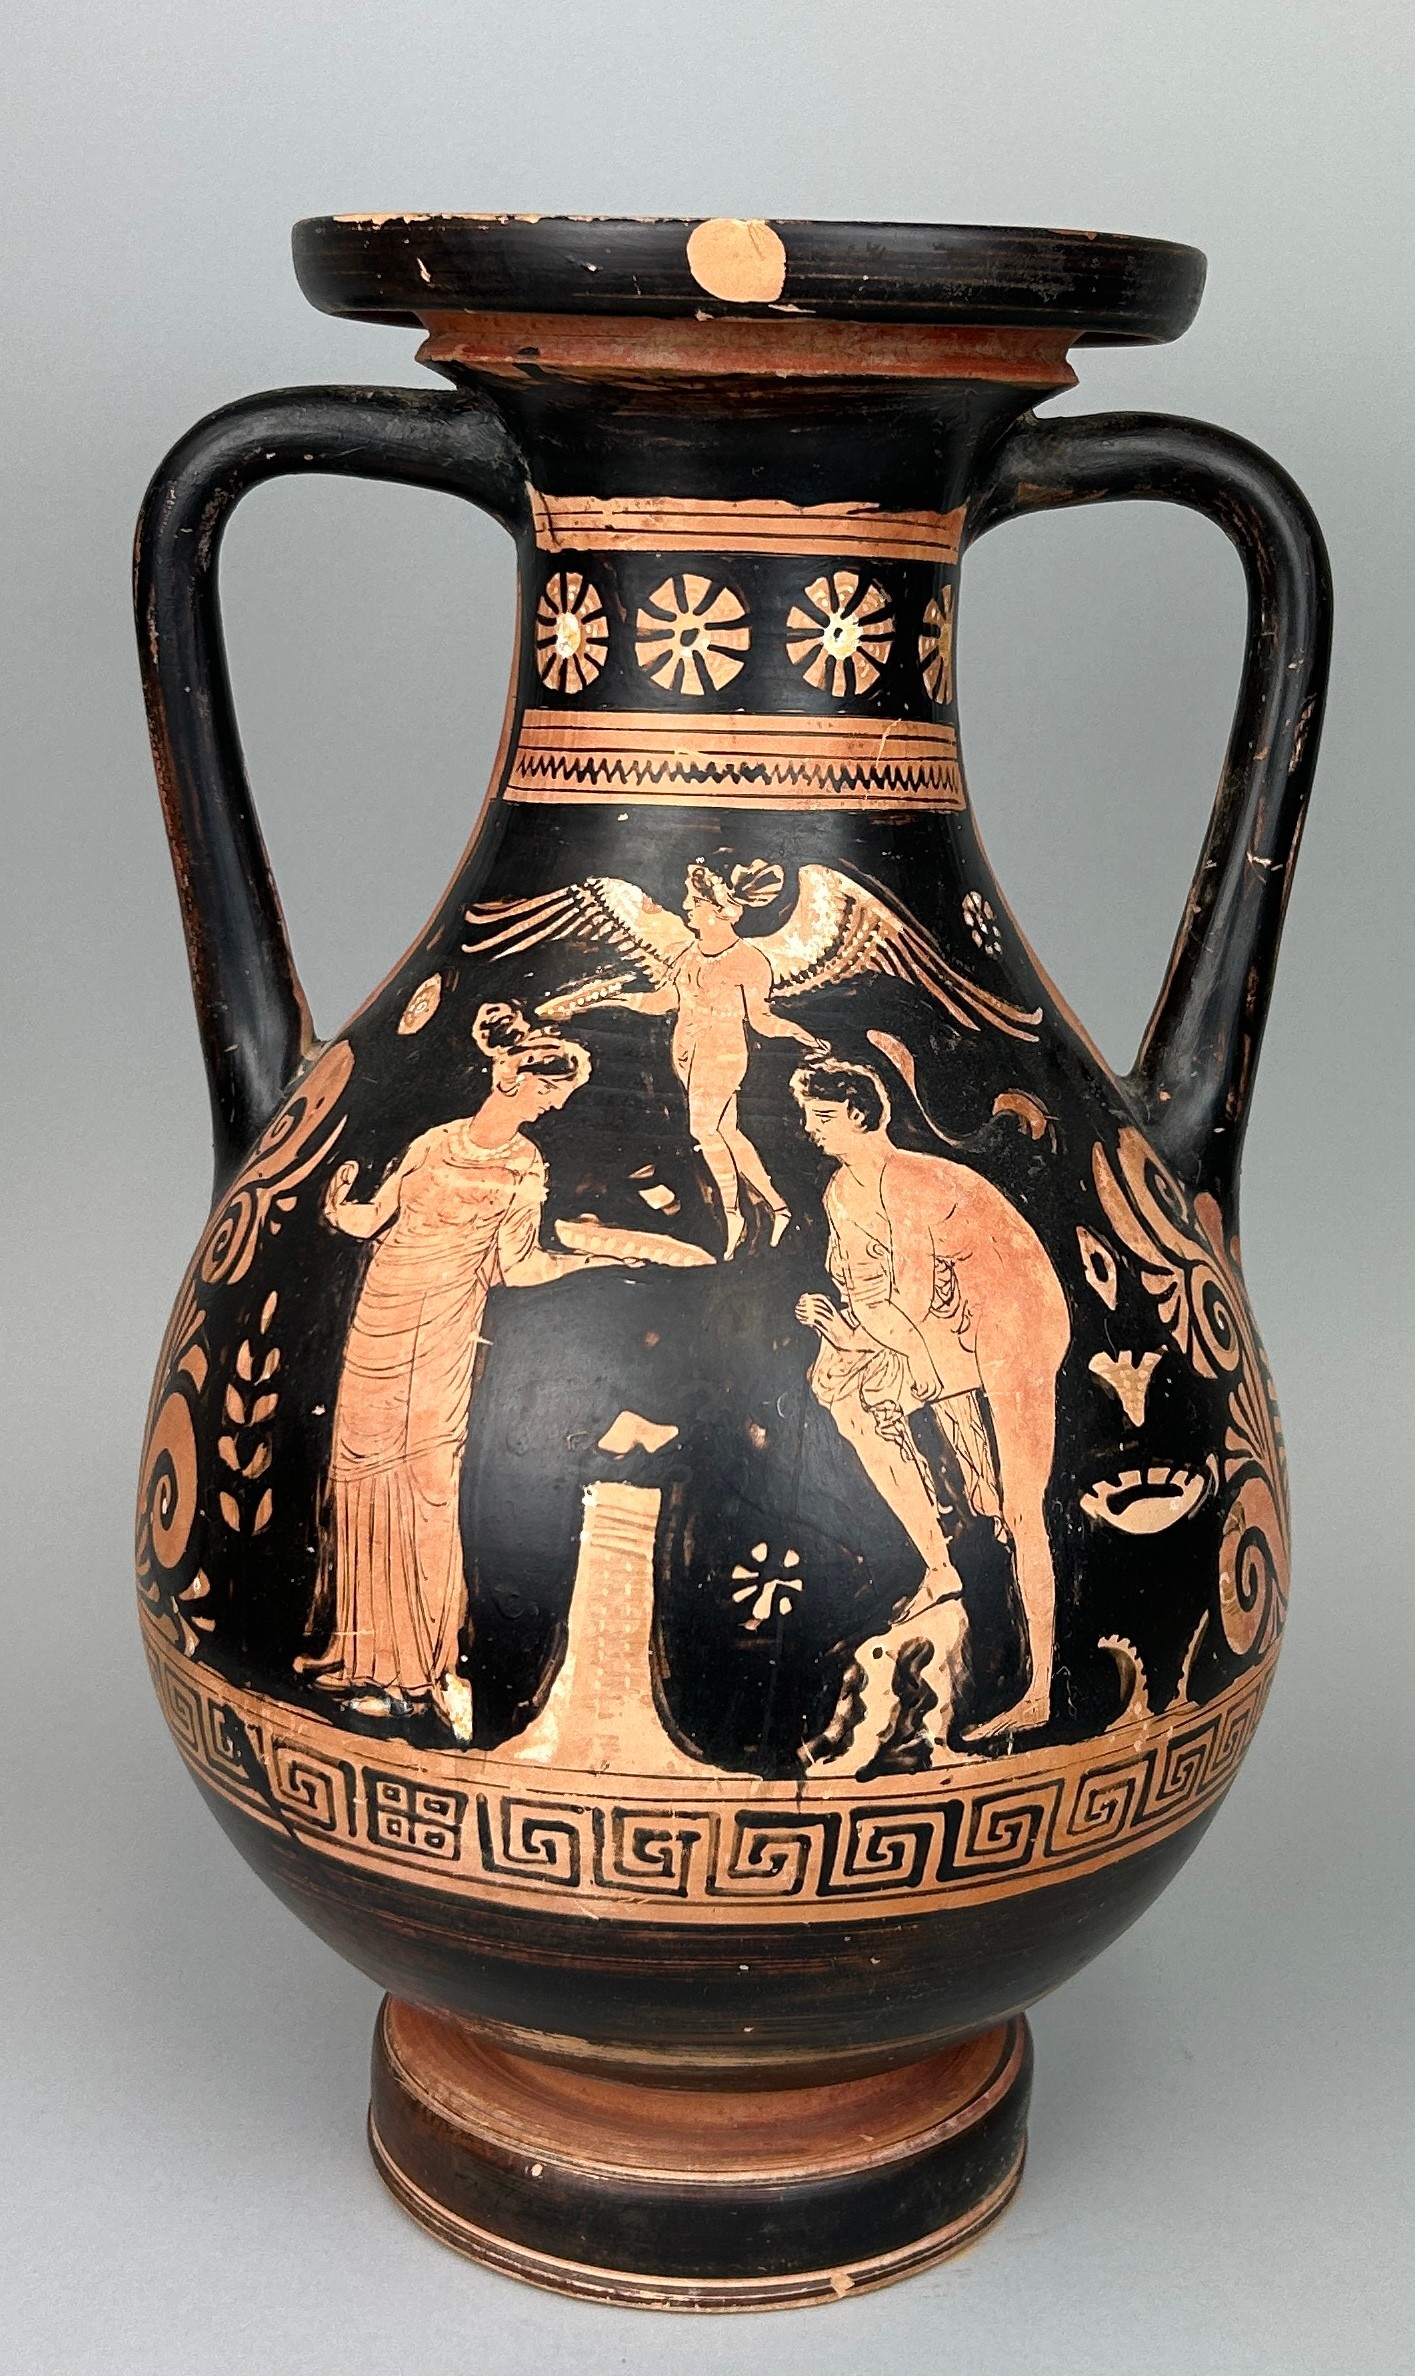 AN APULIAN POTTERY PELIKE CIRCA 4TH CENTURY B.C. 39cm x 21cm One side depicts a young man and